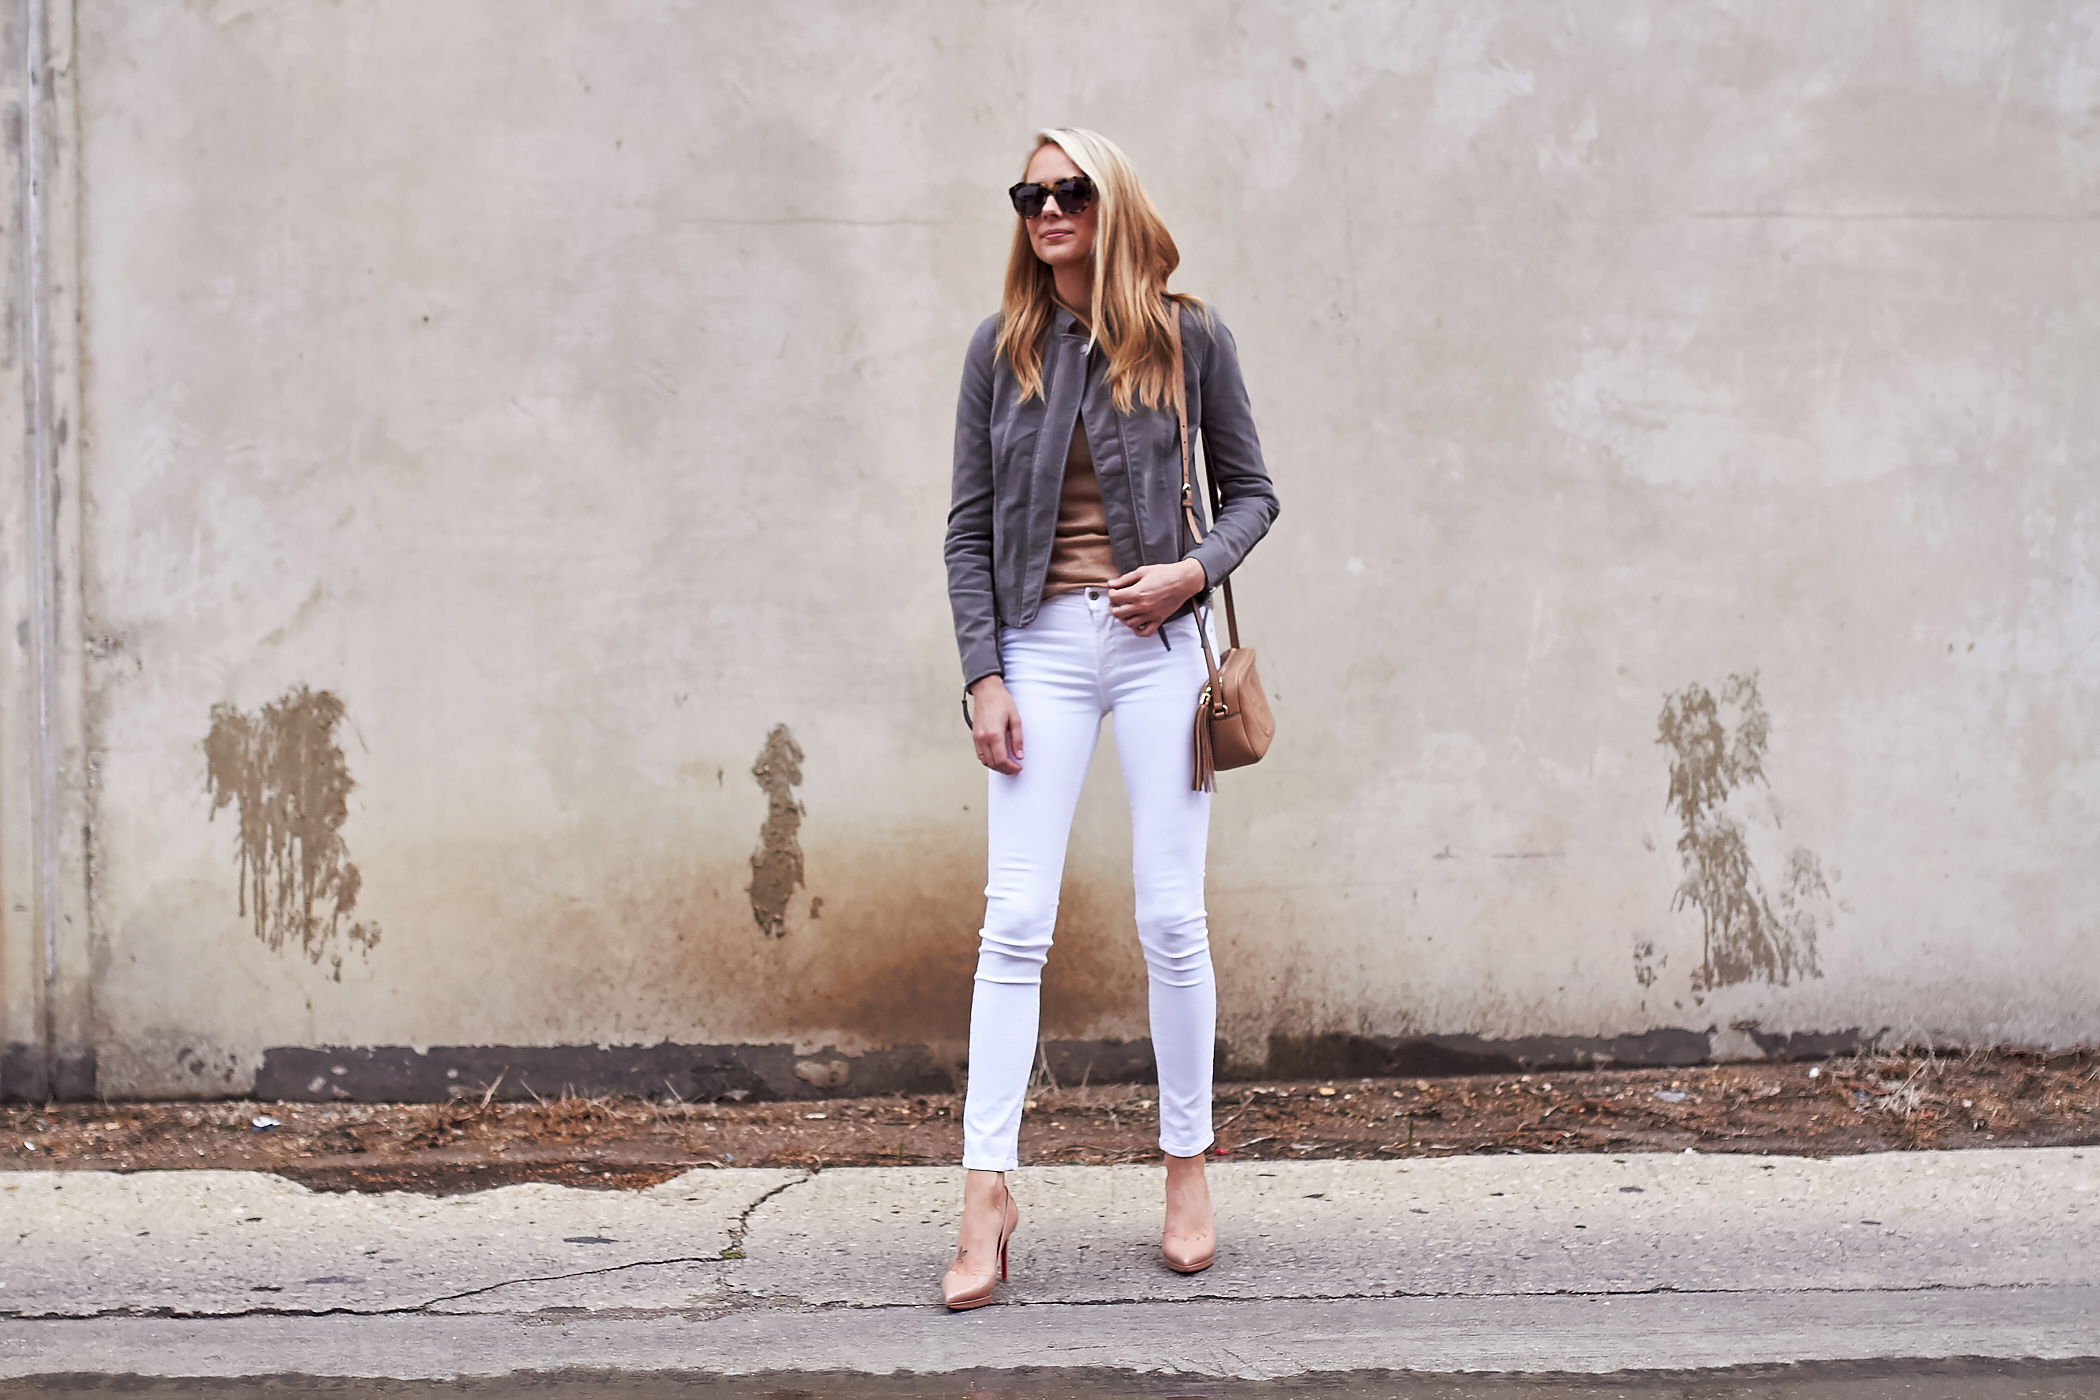 fashion-jackson-free-people-grey-faux-leather-jacket-james-jeans-white-skinny-jeans-louboutin-nude-pumps-camel-sweater